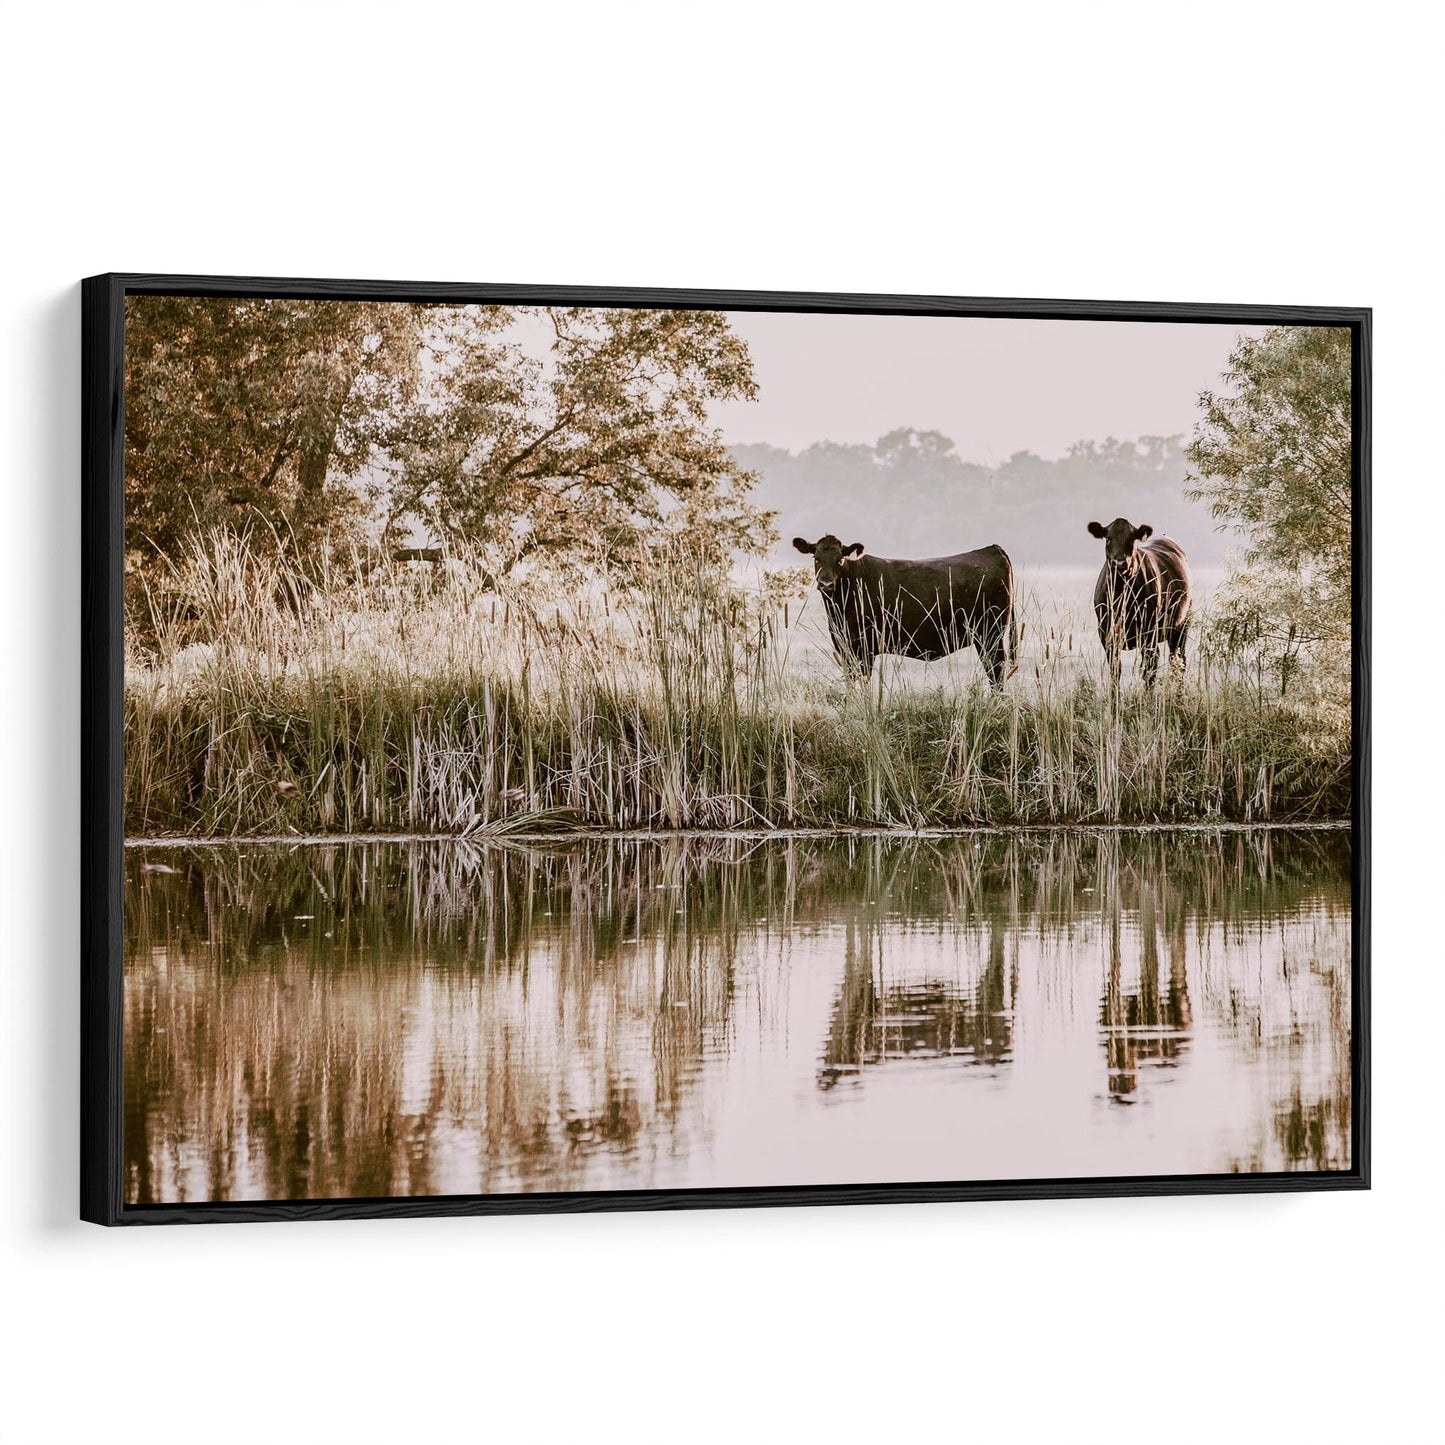 Black Angus Cattle Wall Art Canvas-Black Frame / 12 x 18 Inches Wall Art Teri James Photography